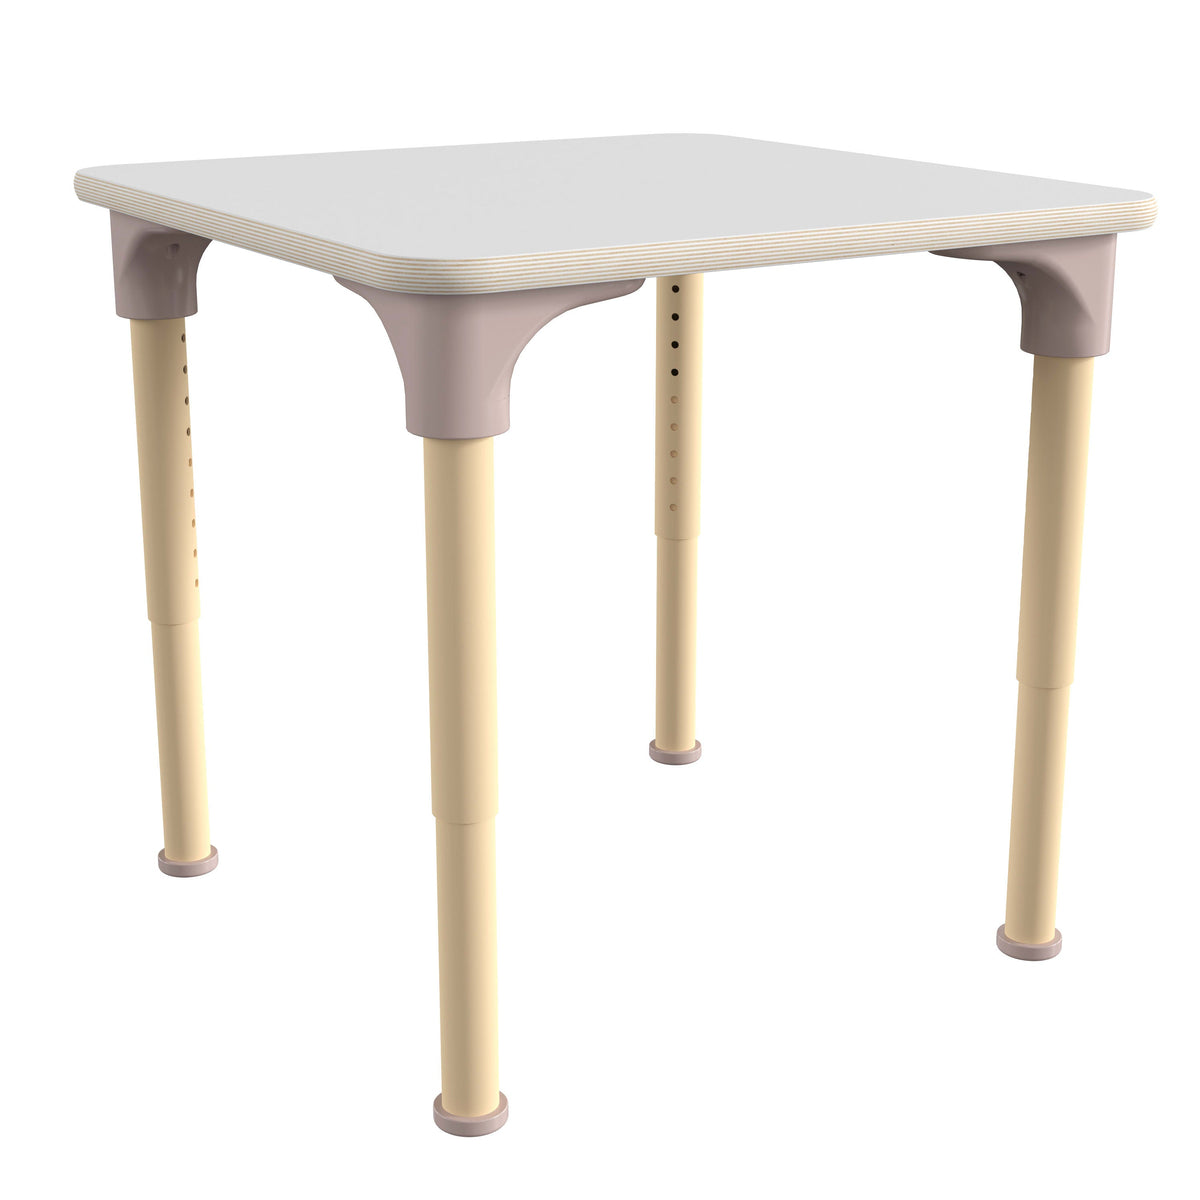 Commercial Grade Adjustable Height Square Wooden Classroom Table - Beech/White